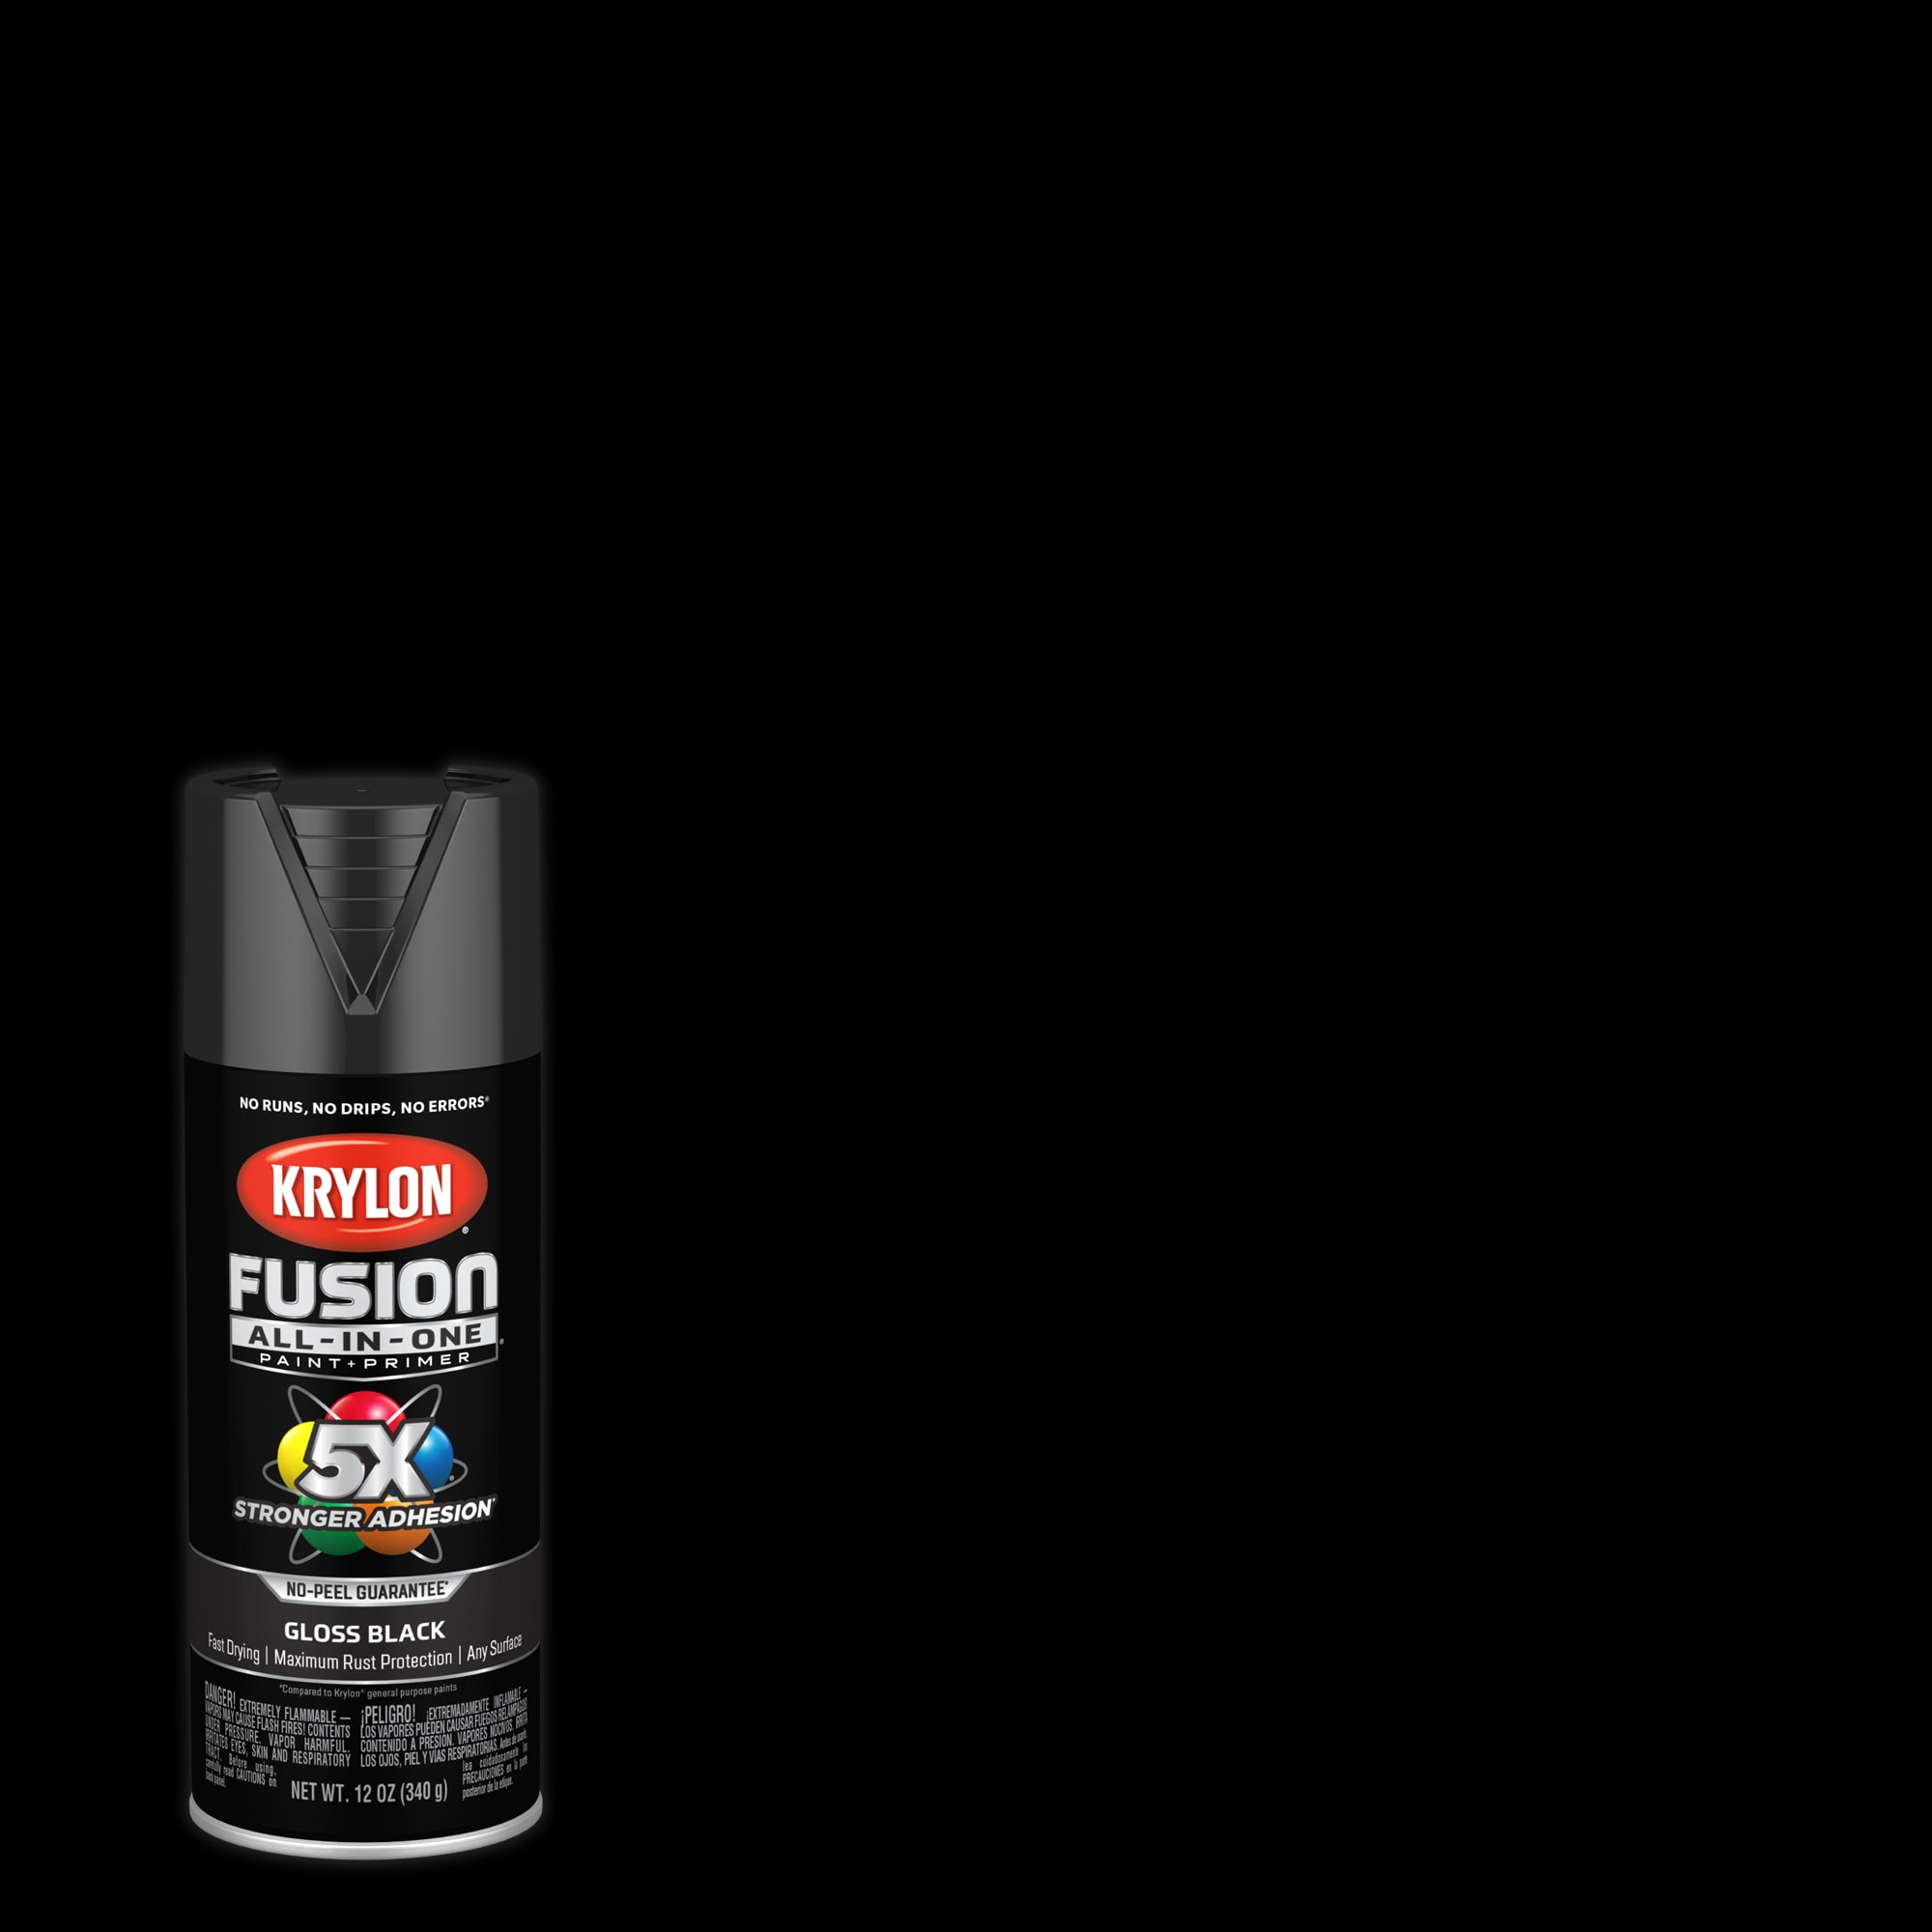 Krylon Spray Paint Review, How to Apply a Top Coat on Acrylic Painting